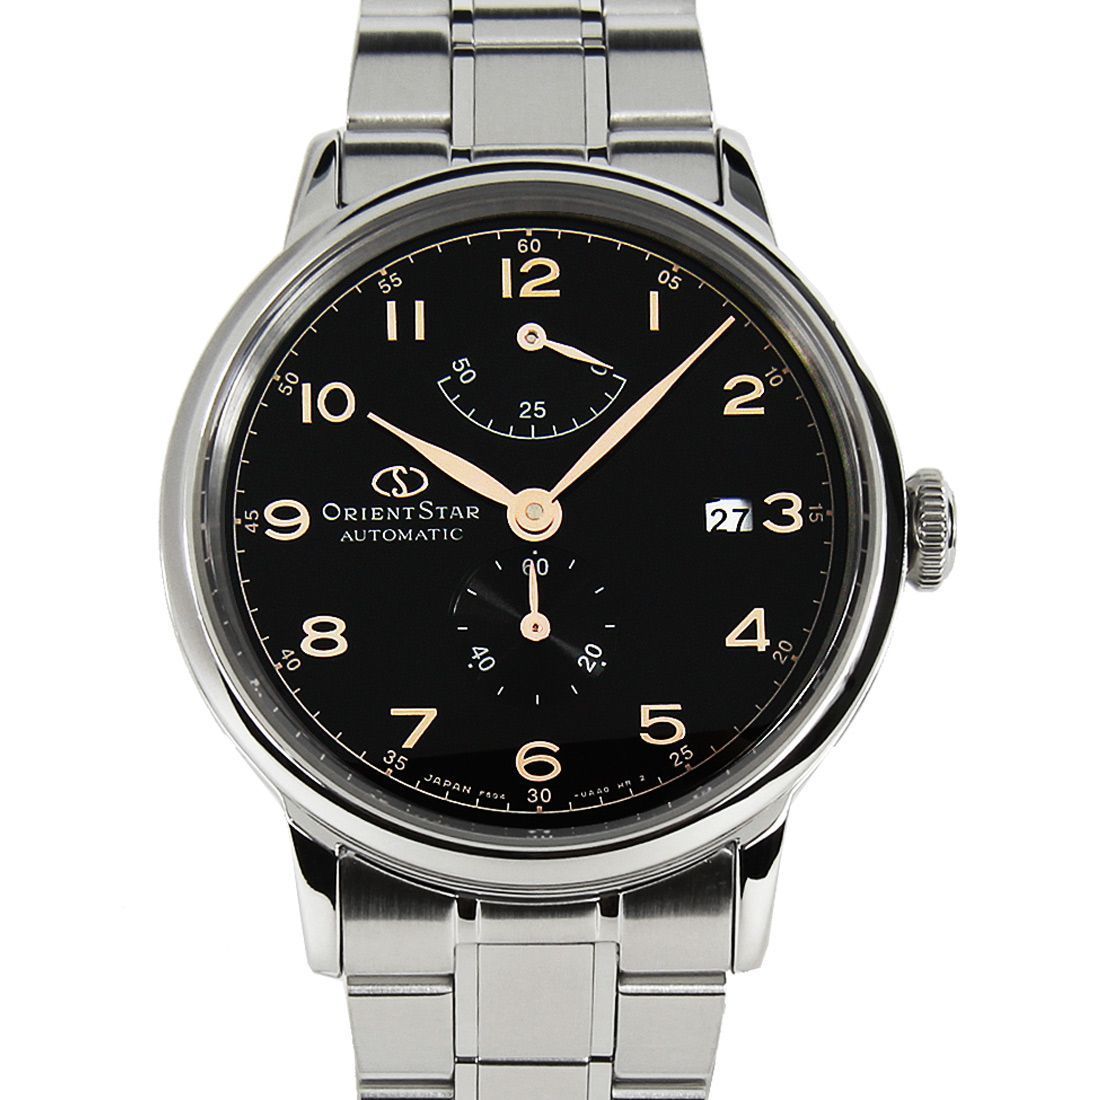 Orient Star Power Reserve Black Dial RE-AW0001B RE-AW0001B00B Stainless Watch -Orient